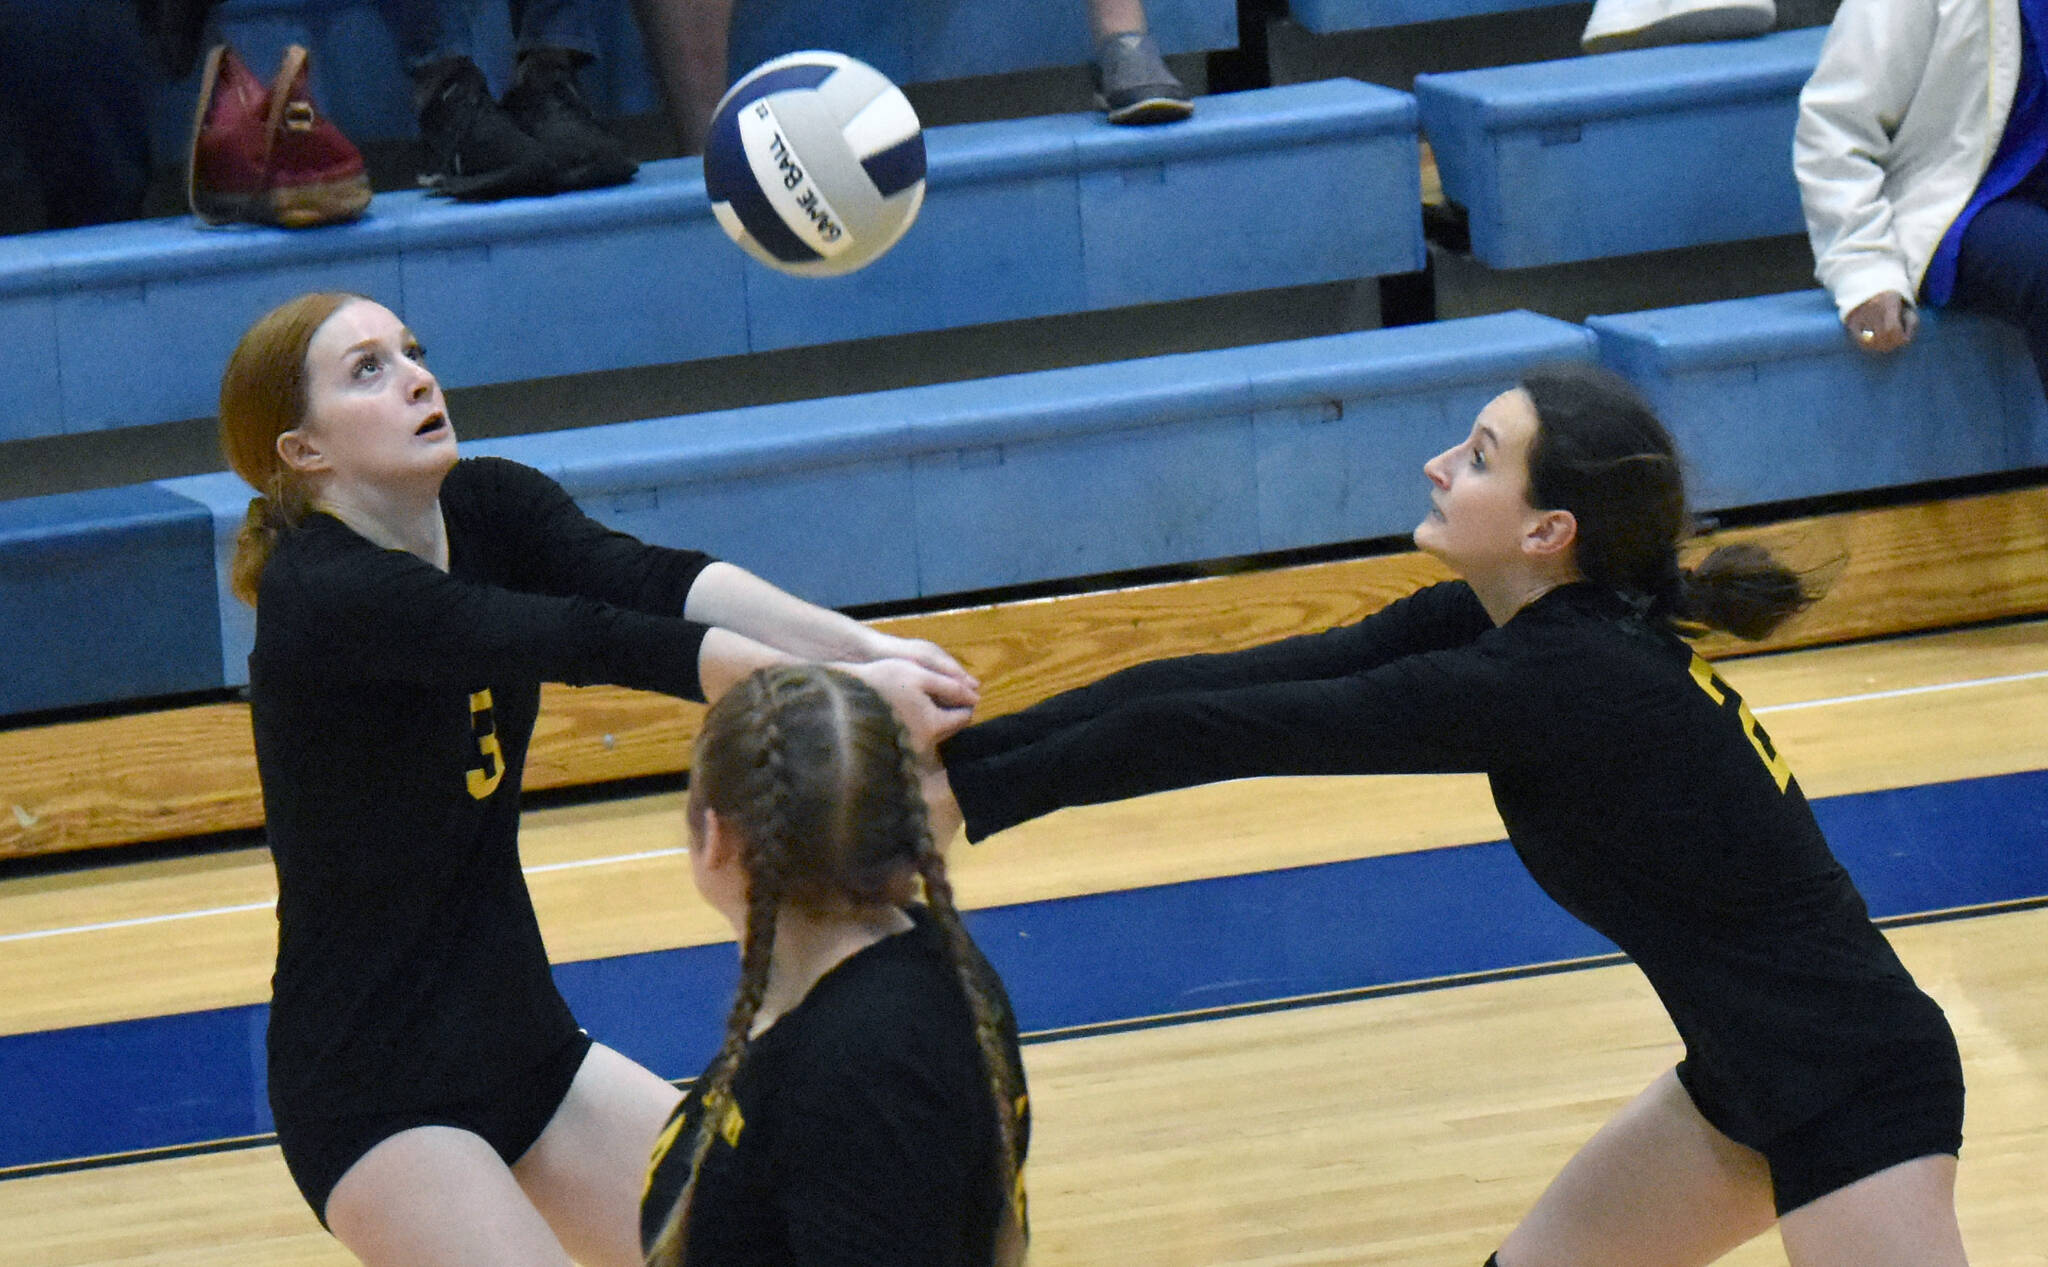 Seward’s Robin Cronin and Olive Sayler combine to dig up a ball against Soldotna on Tuesday, Sept. 20, 2022, at Soldotna High School in Soldotna, Alaska. (Photo by Jeff Helminiak/Peninsula Clarion)